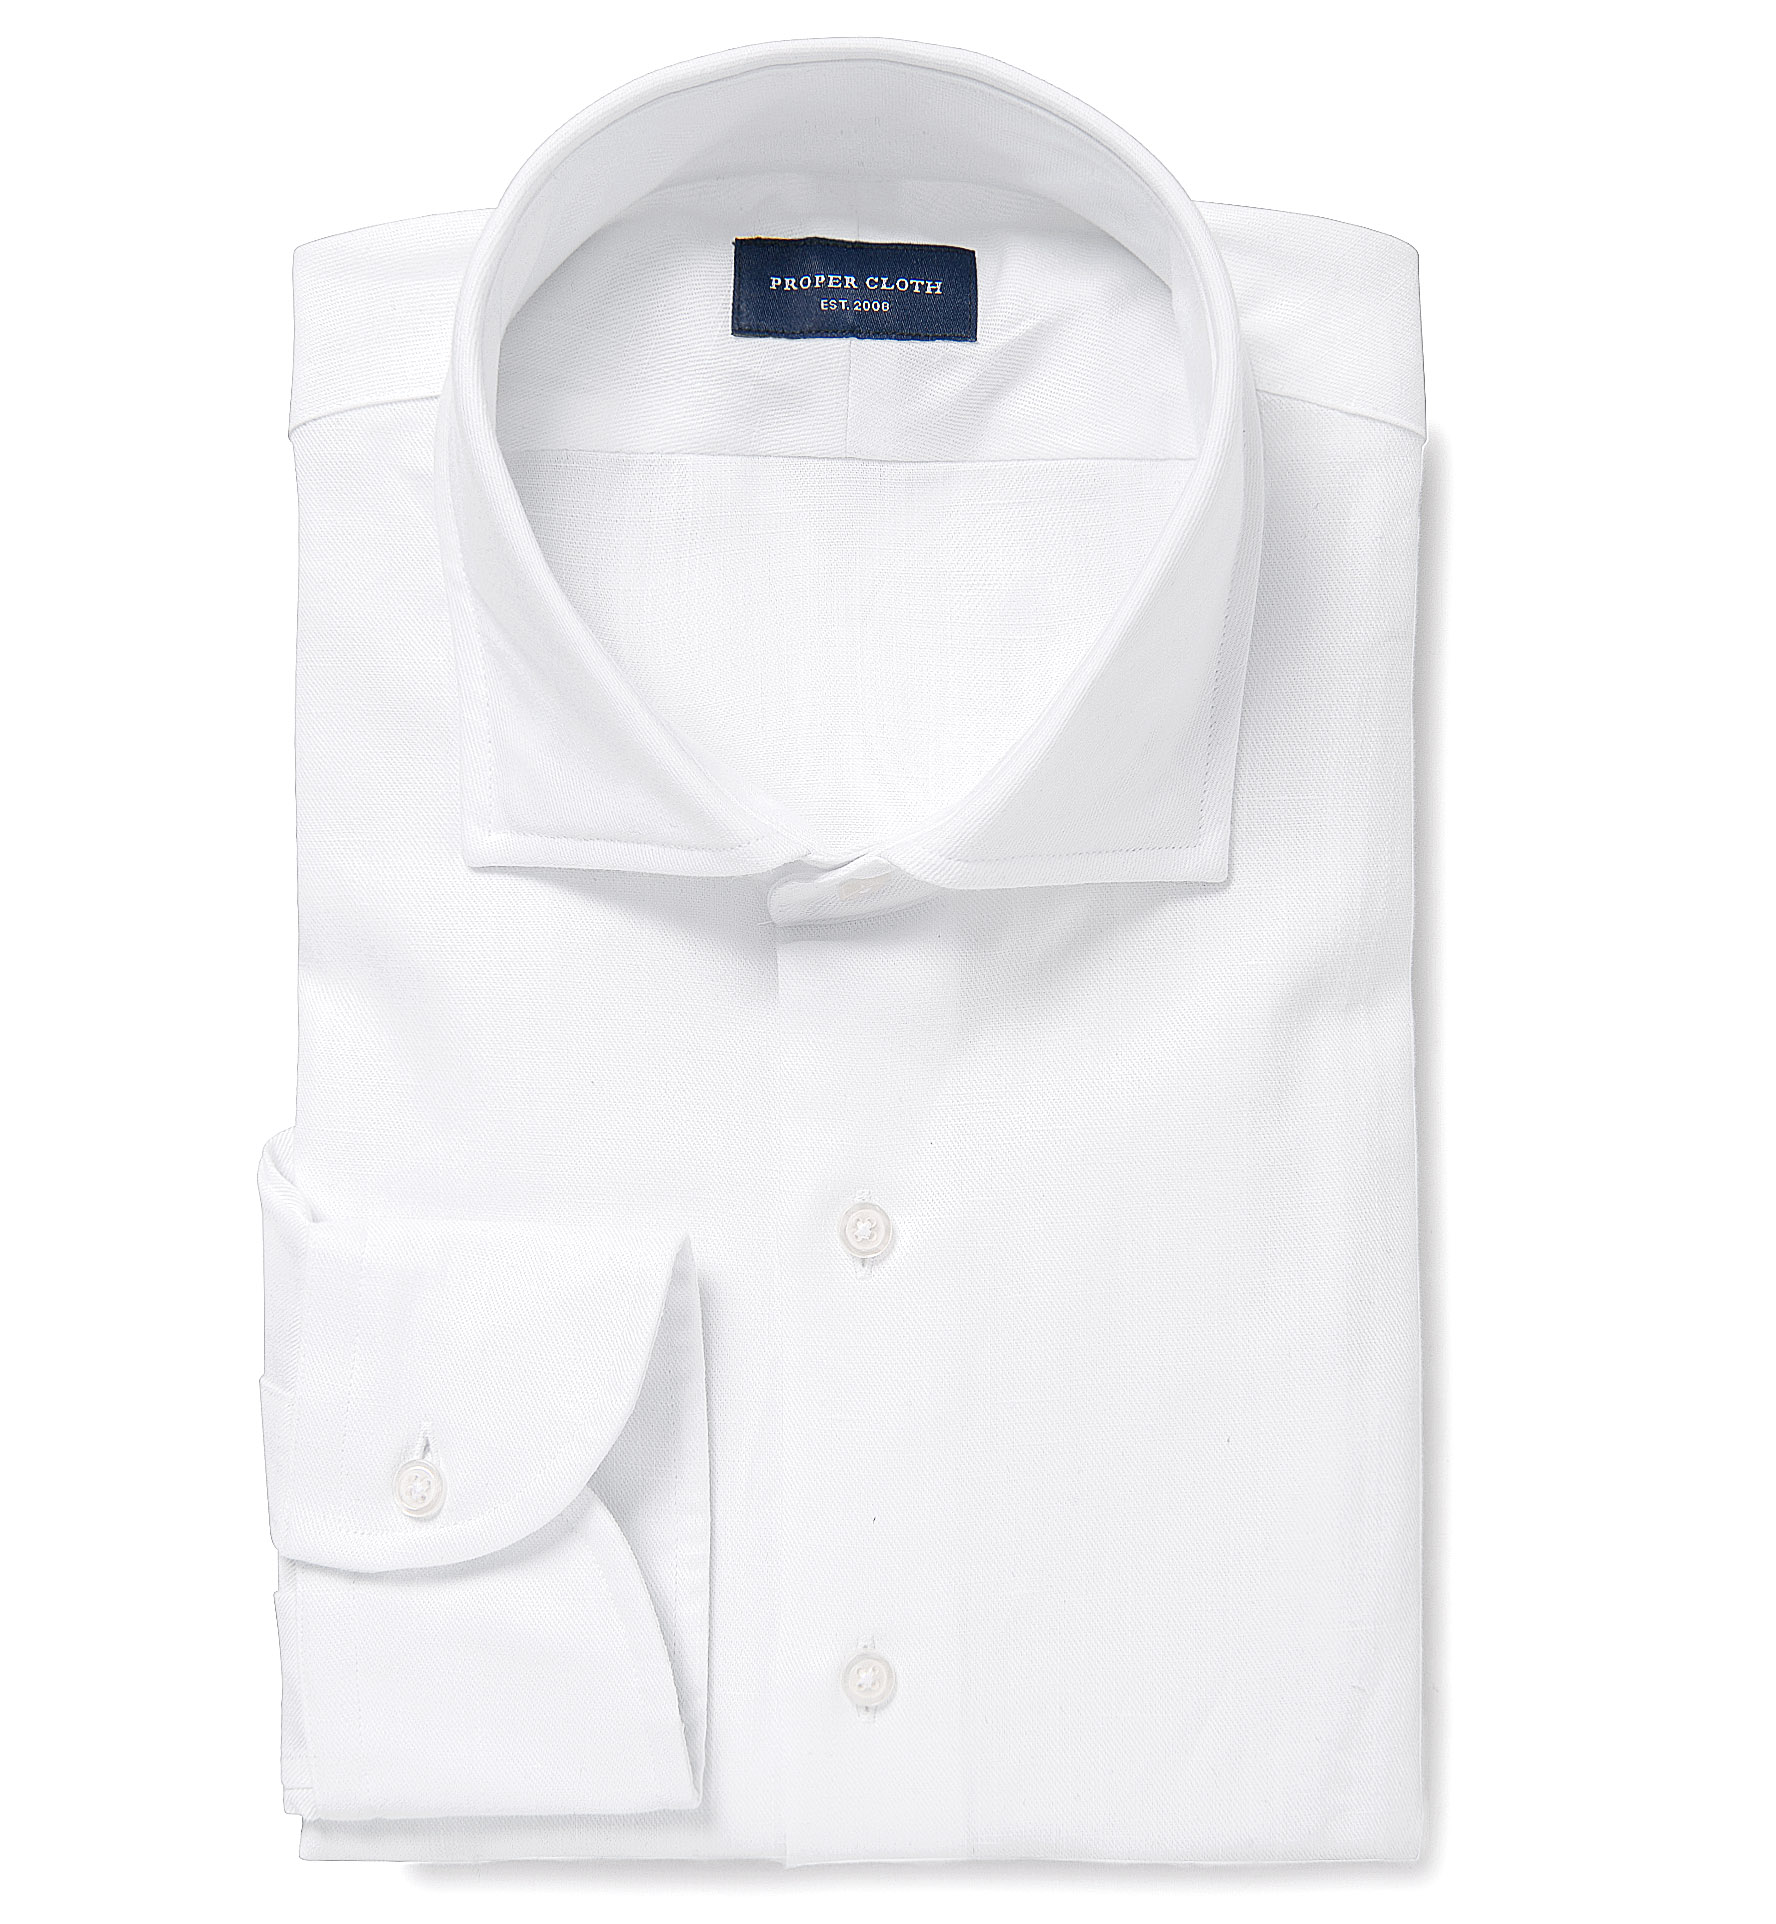 Thomas Mason White Cotton and Linen Denim Fitted Shirt by Proper Cloth